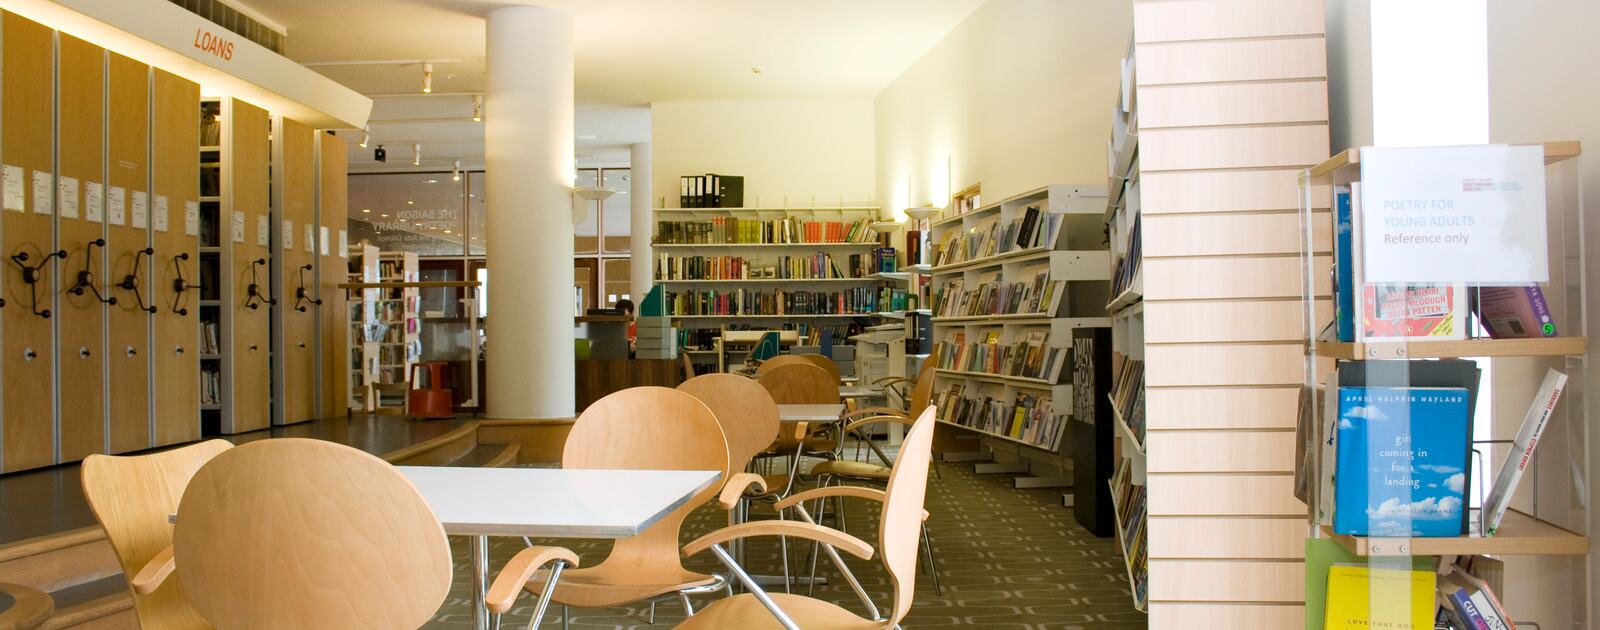 Inside The Poetry Library at the Southbank Centre